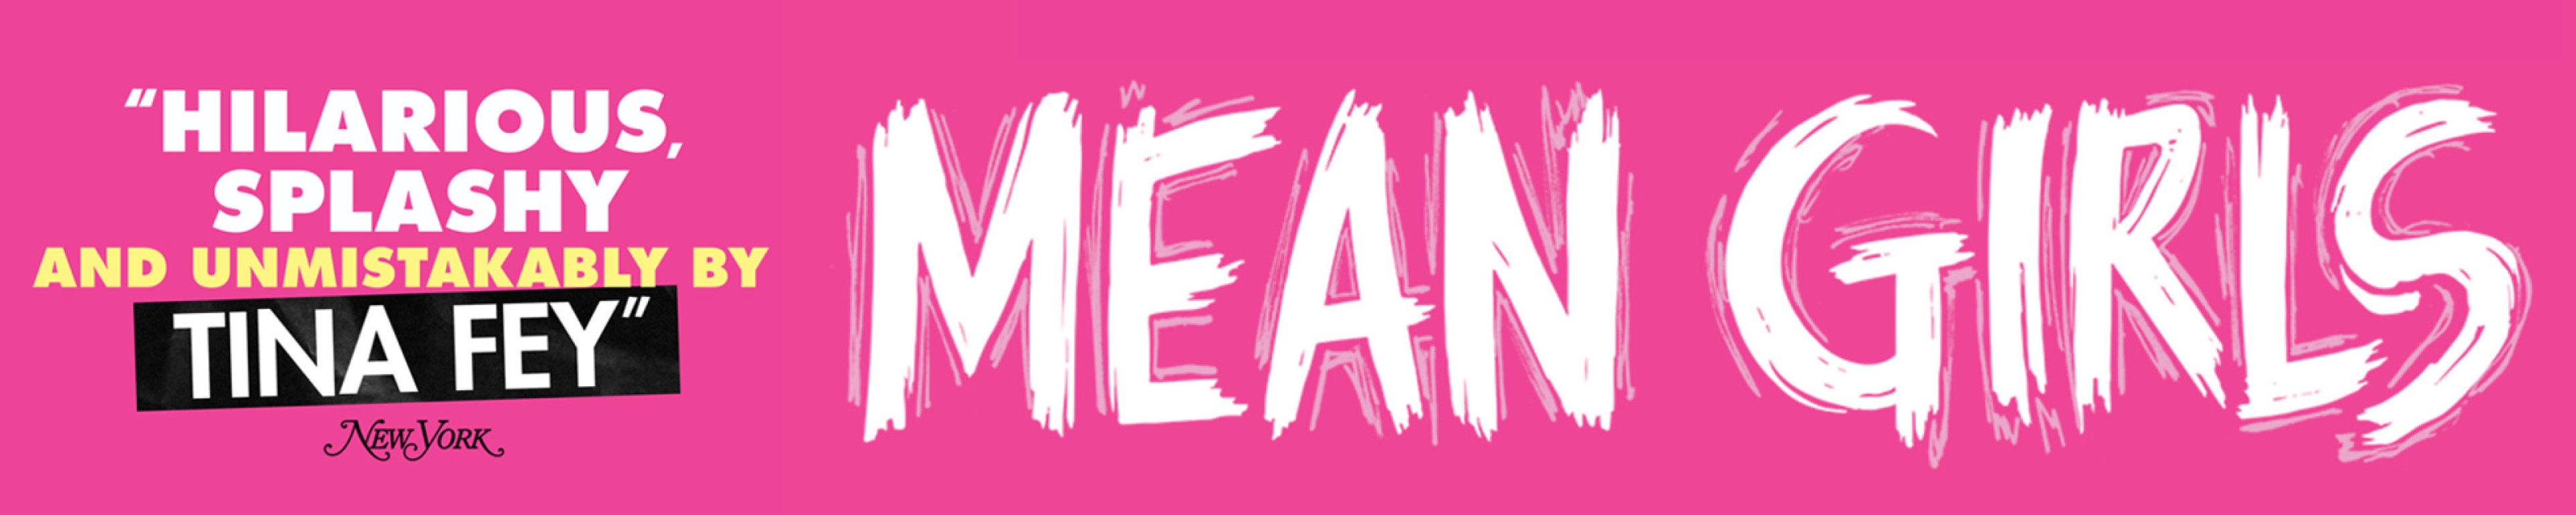 Mean Girls Logo on a bright pink background